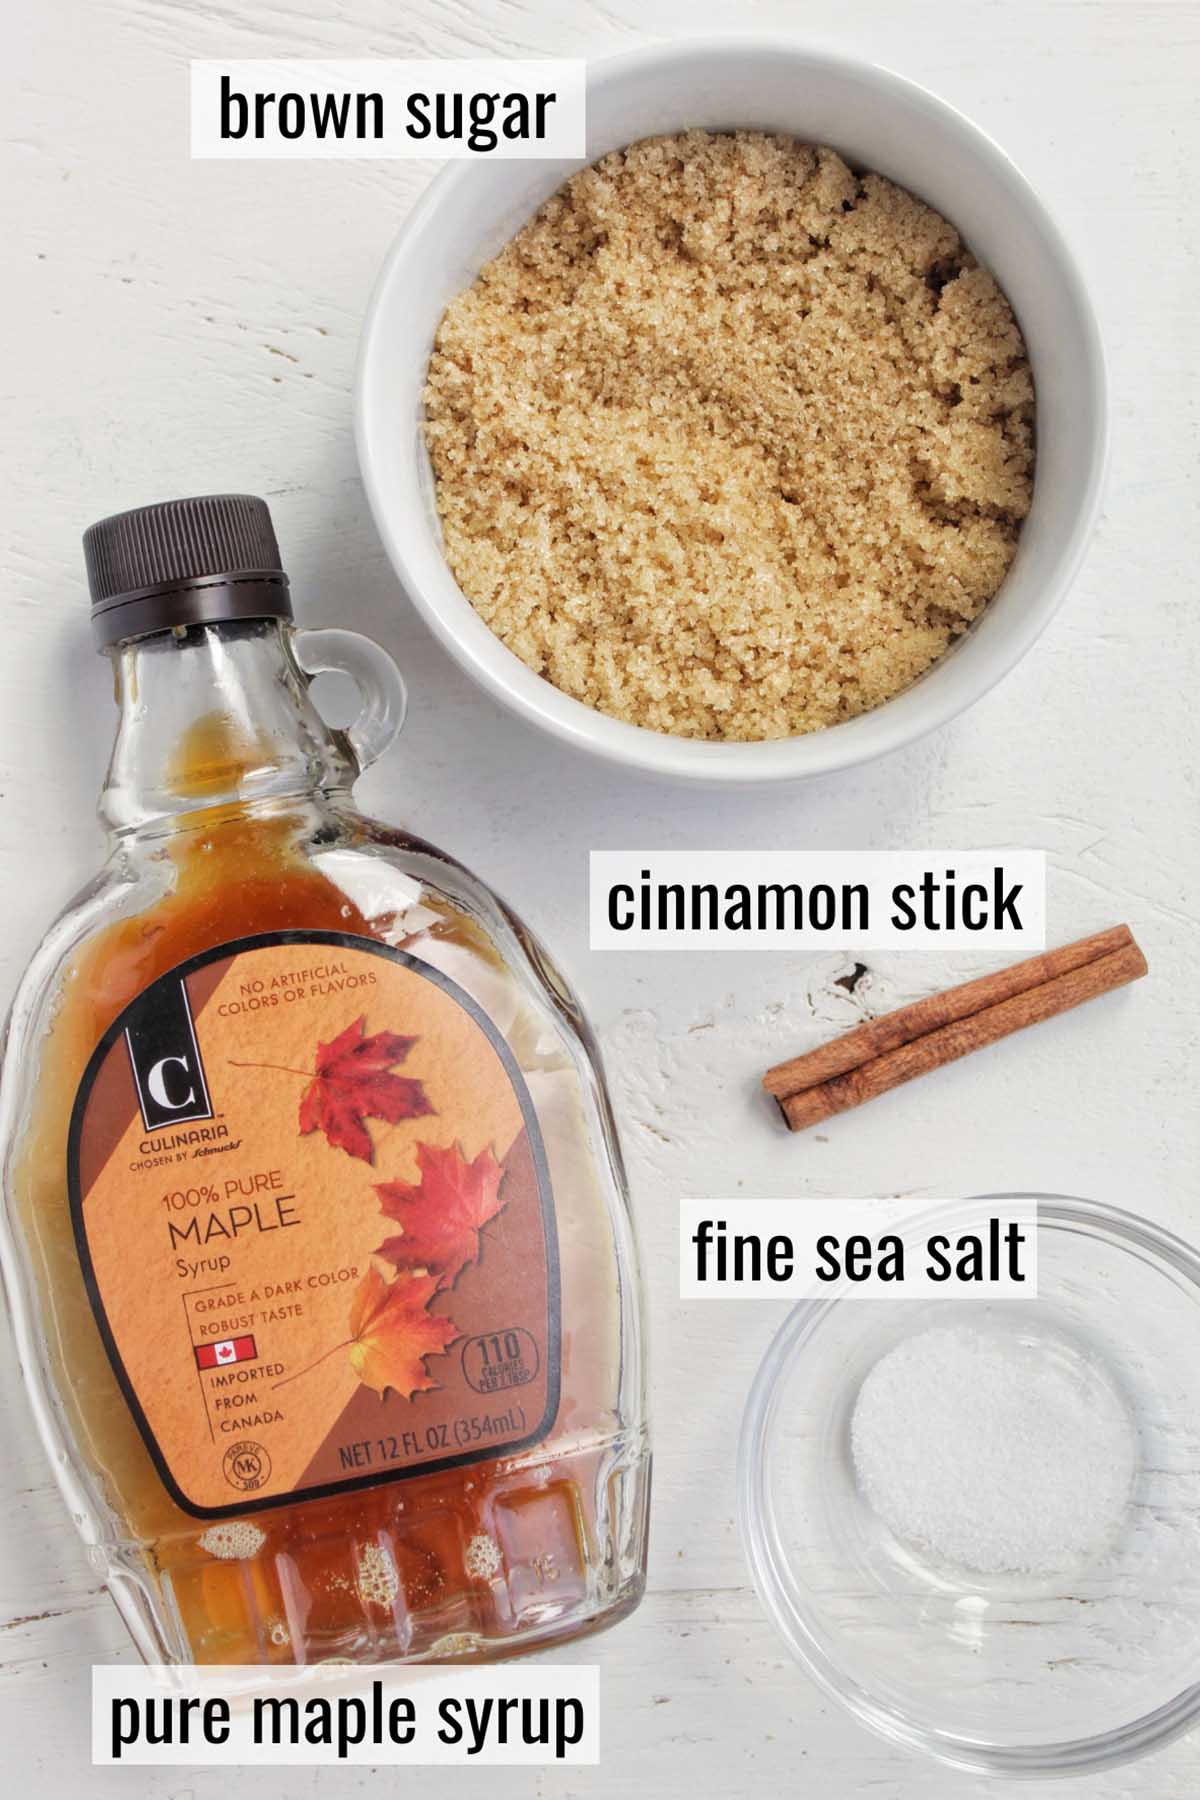 maple syrup, brown sugar, cinnamon stick, and fine sea salt with labels.